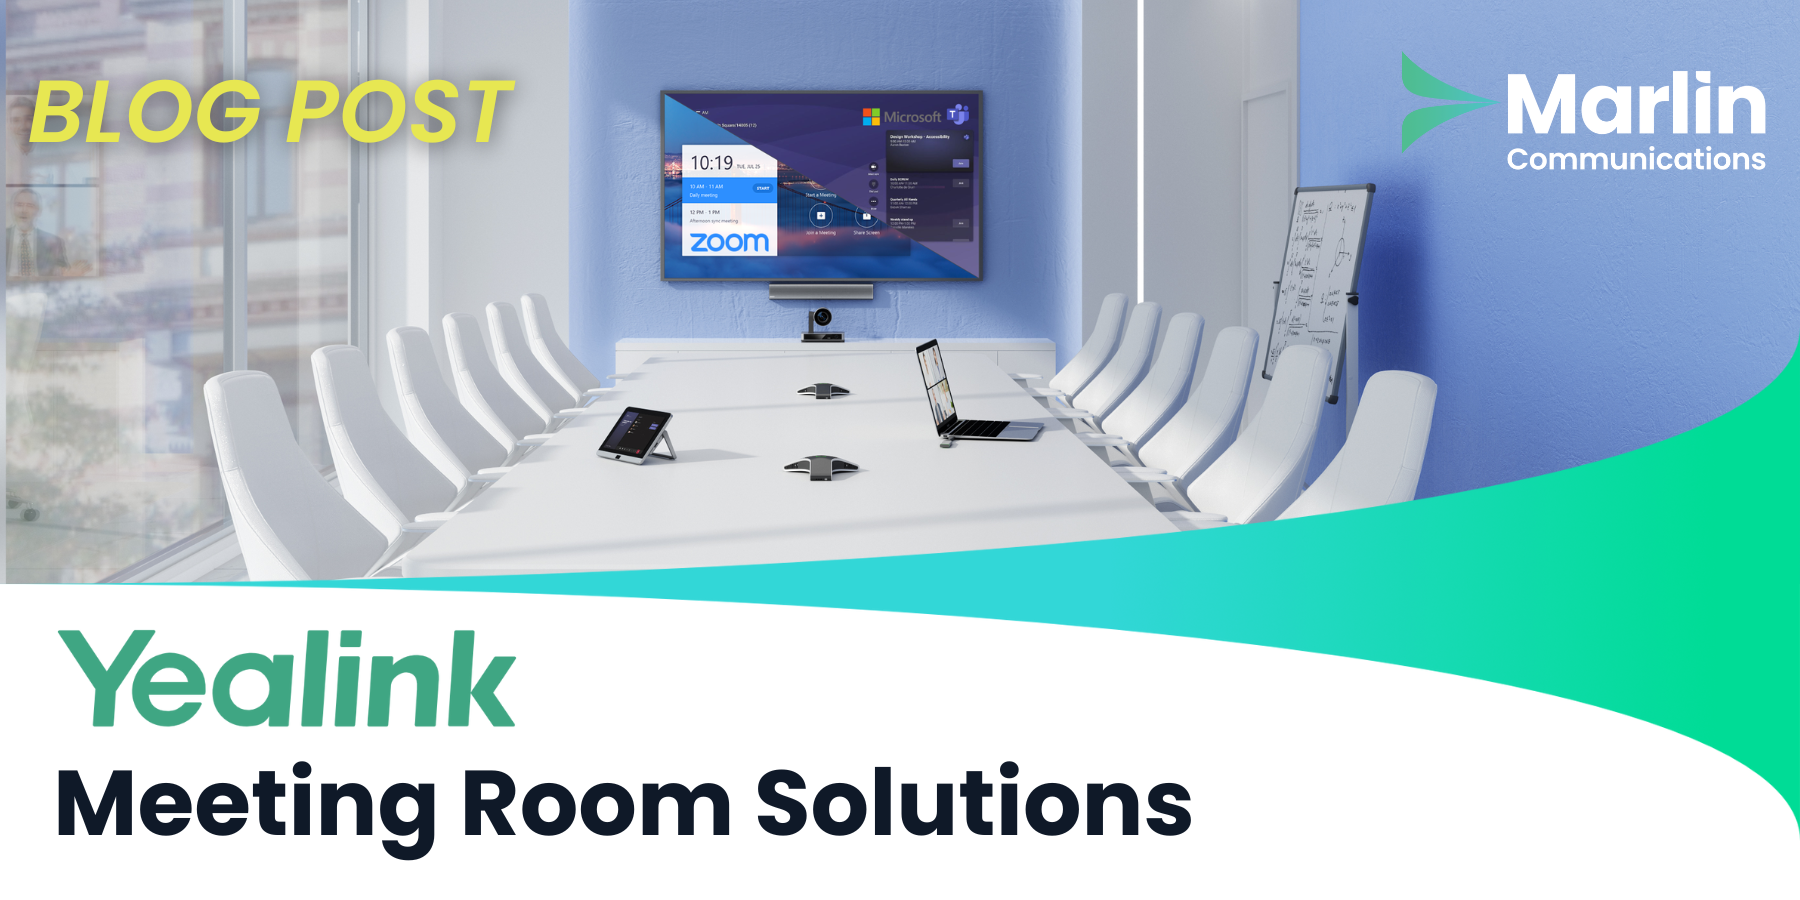 Featured image for “Yealink Meeting Room Solutions from Marlin Communications”